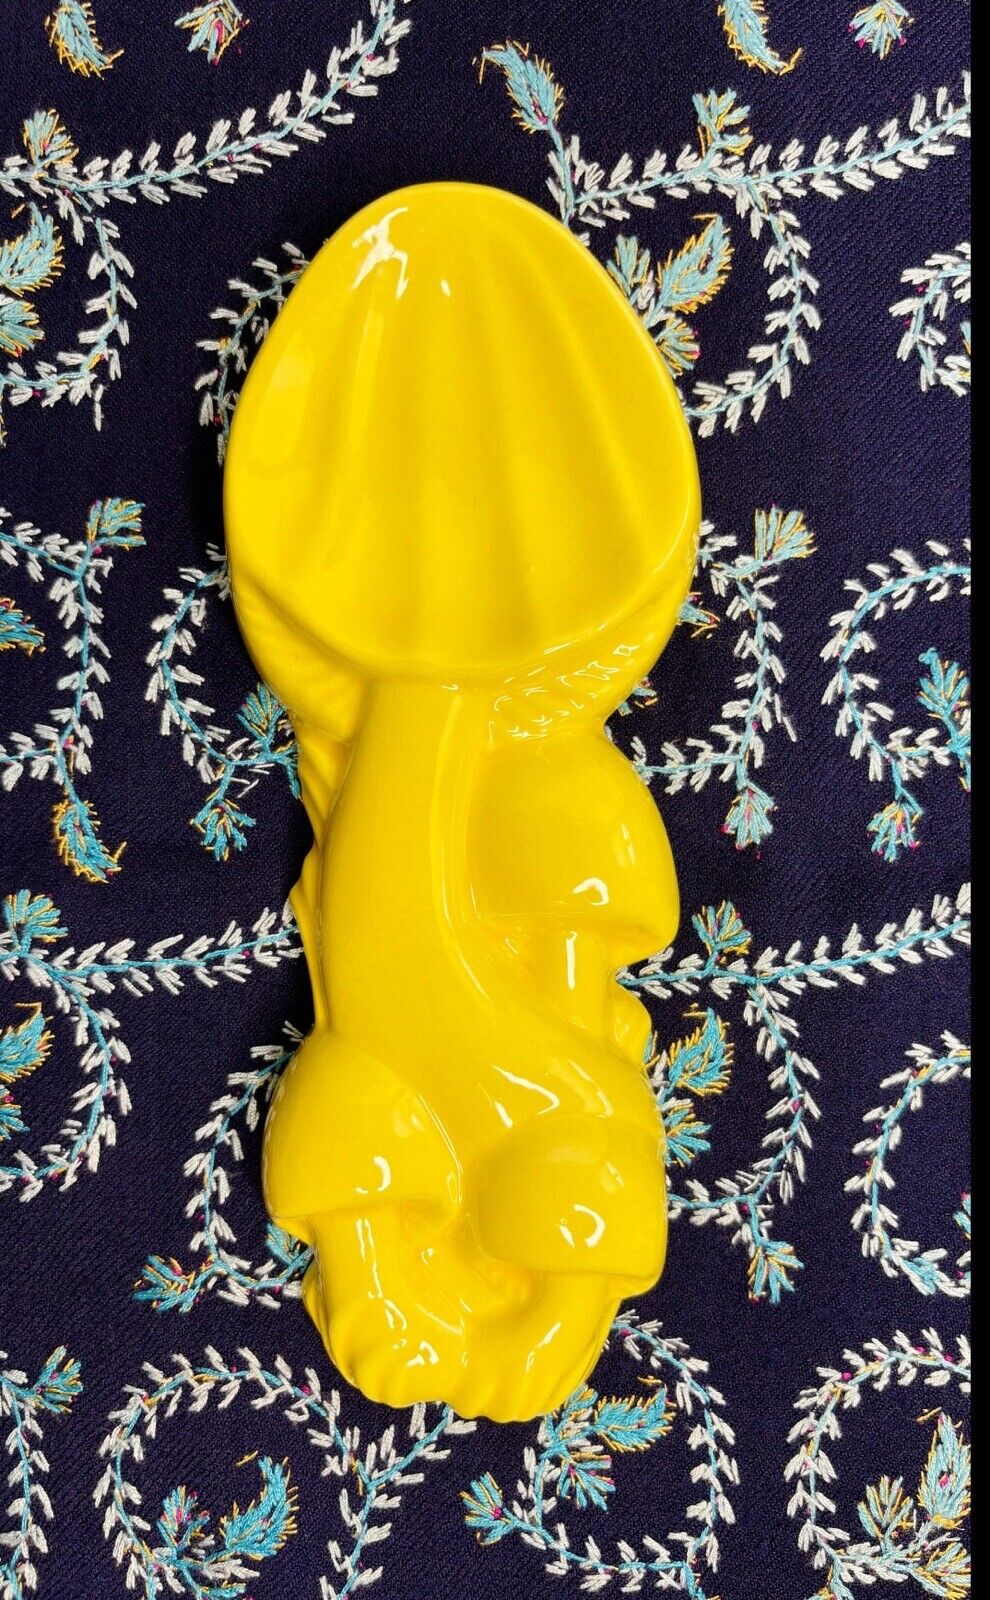 Vintage 1970's Ceramic Yellow Mushroom Spoon Rest or Wall Hanging